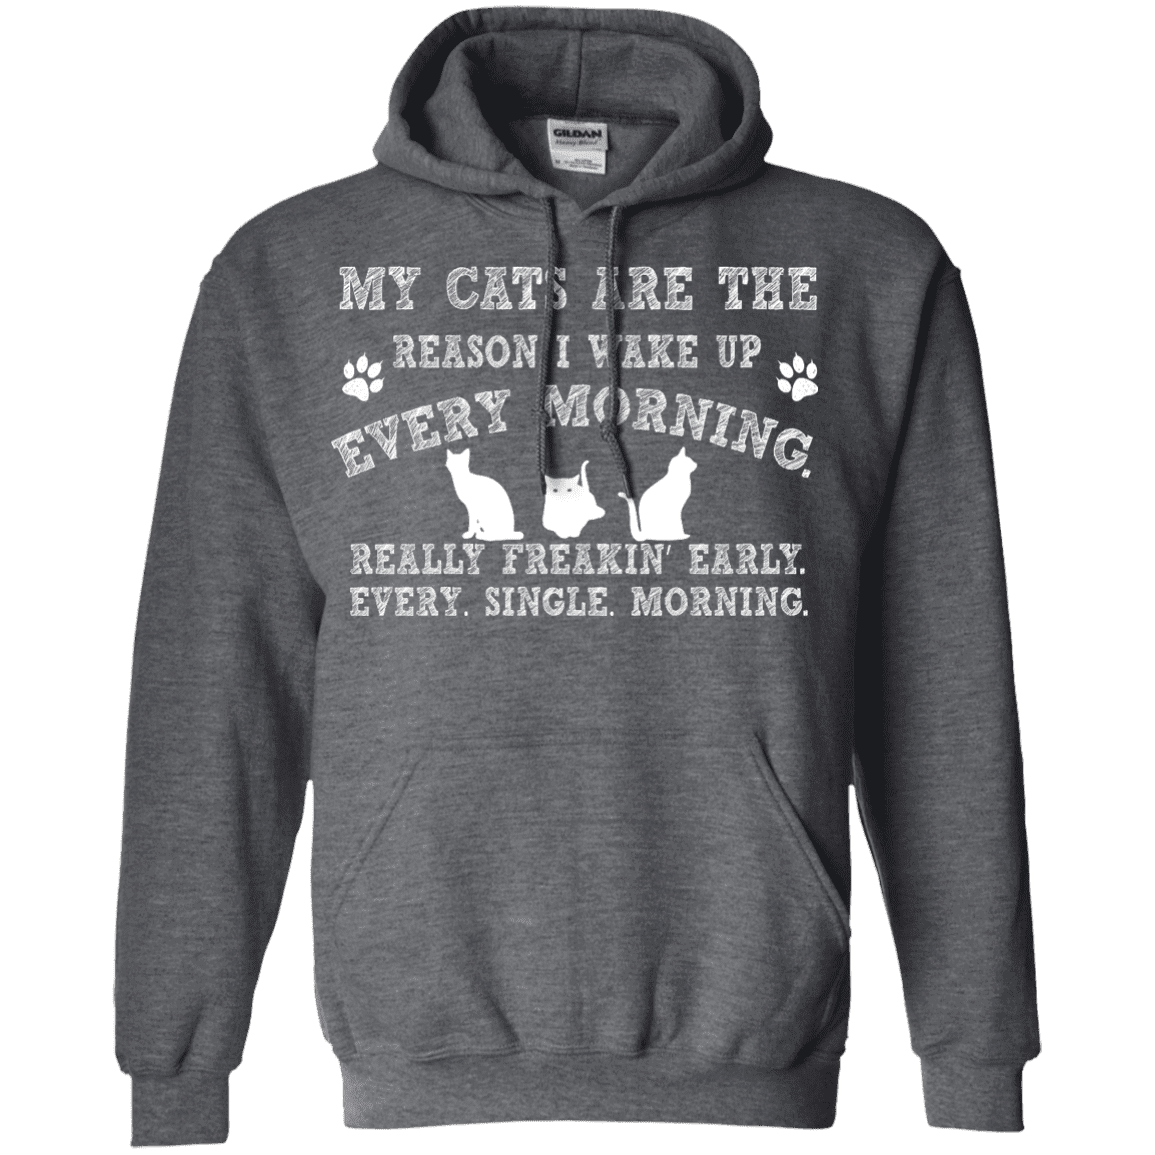 My Cats Are The Reason - Hoodie.